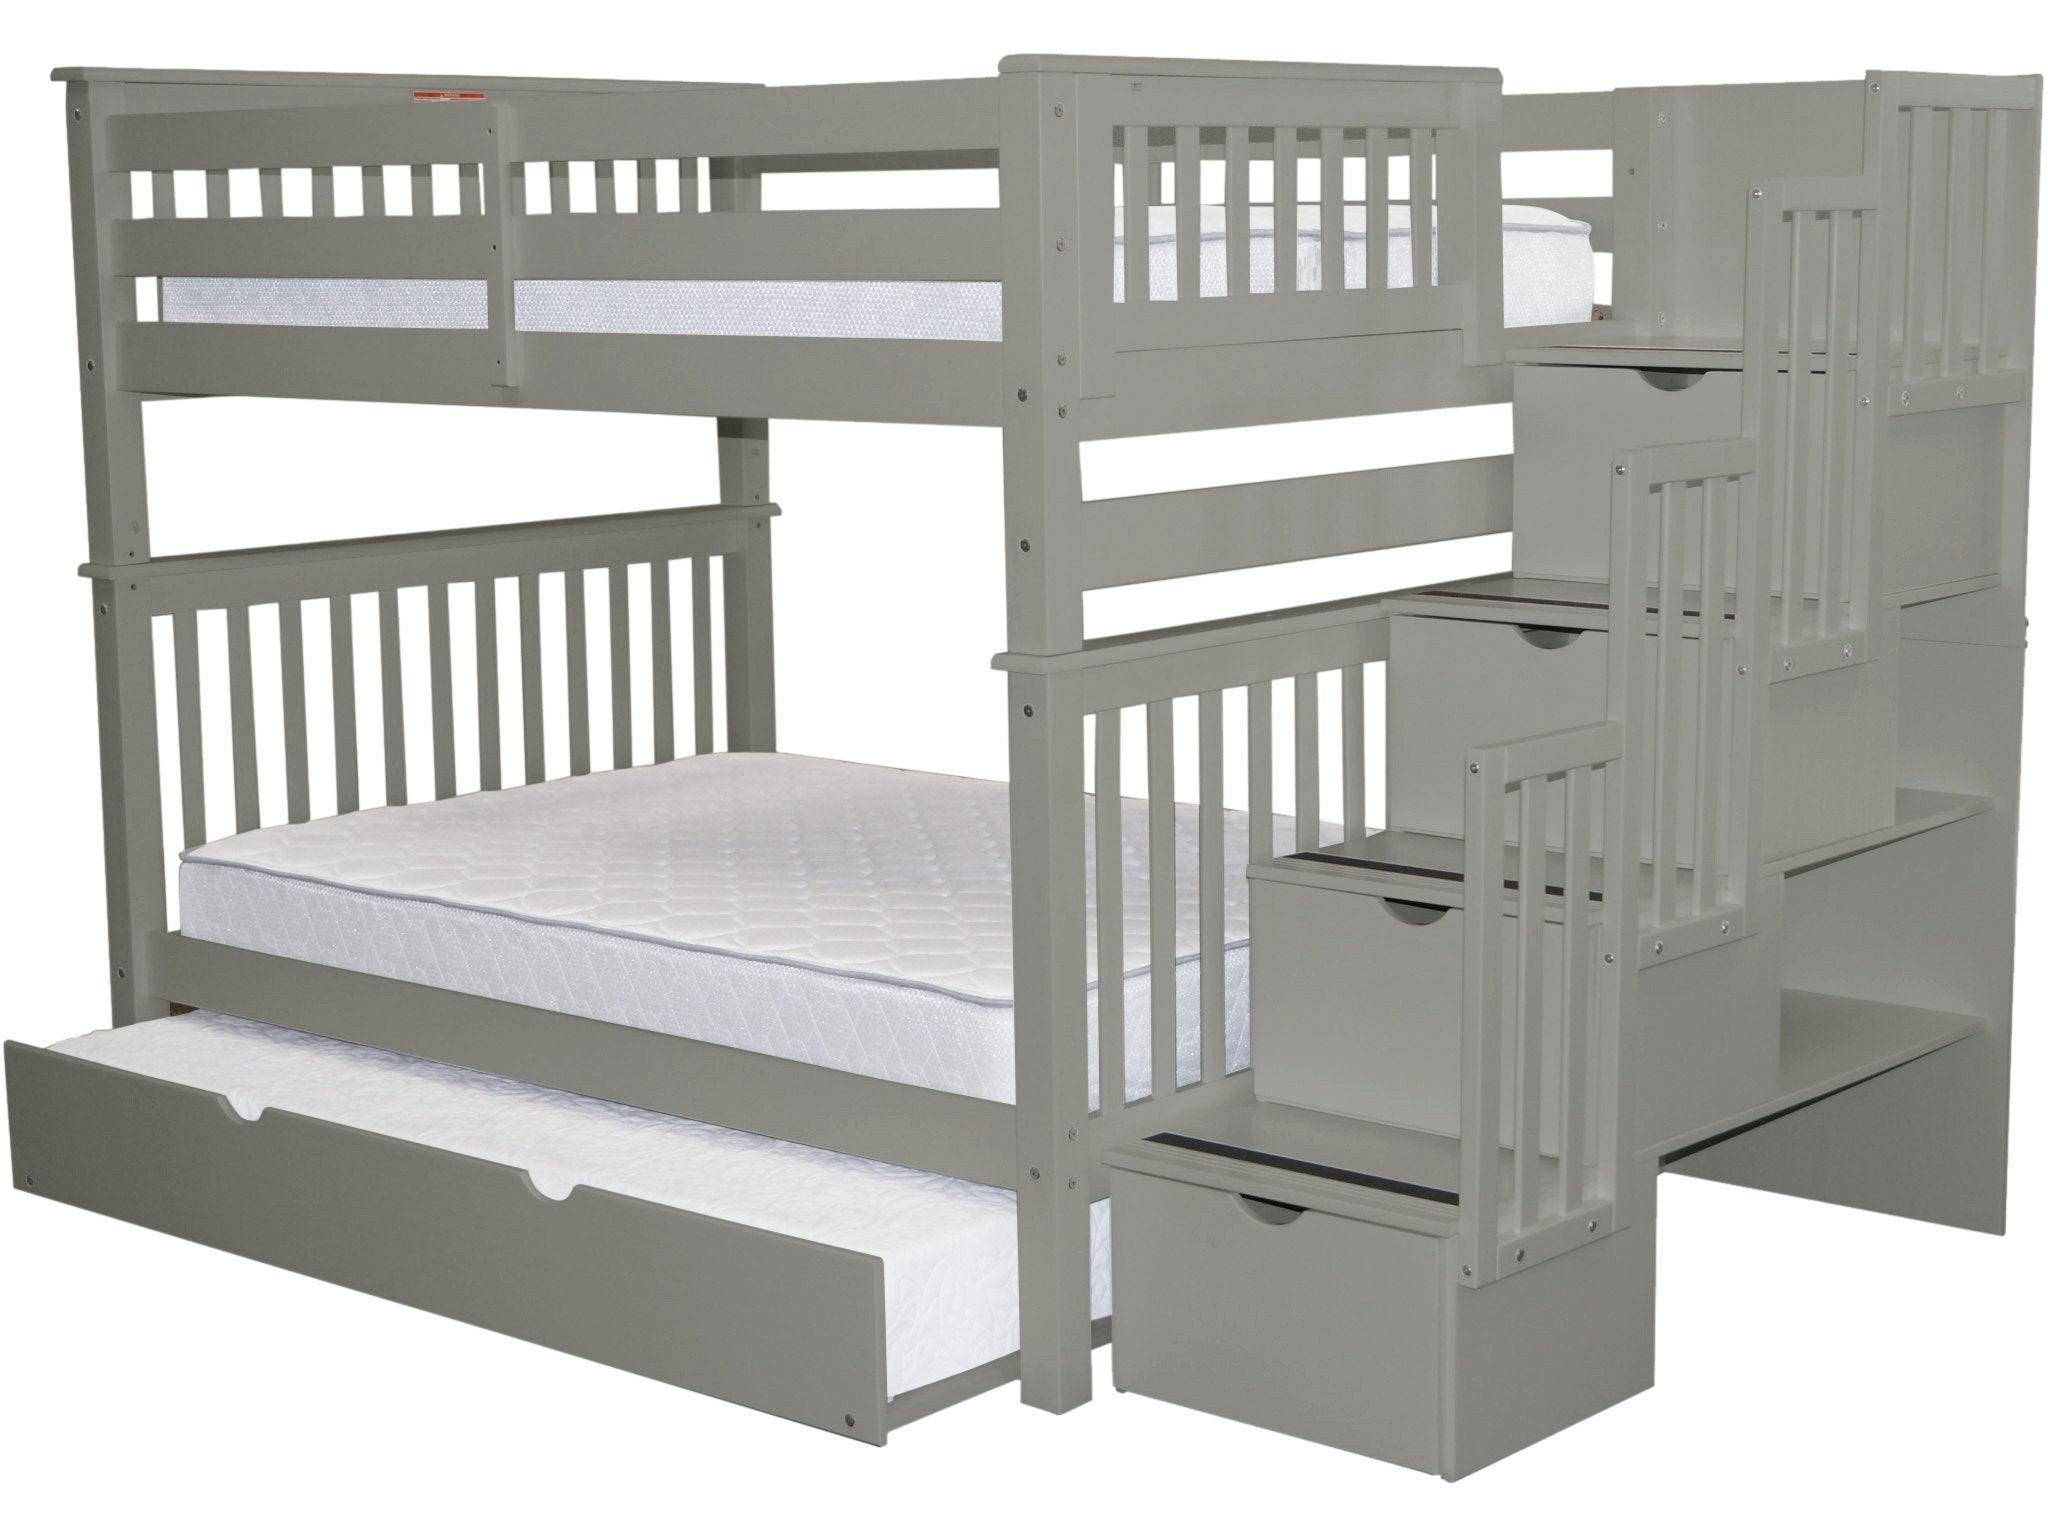 Bunk Bed King Stairway Full, Bunk Bed King Full Over